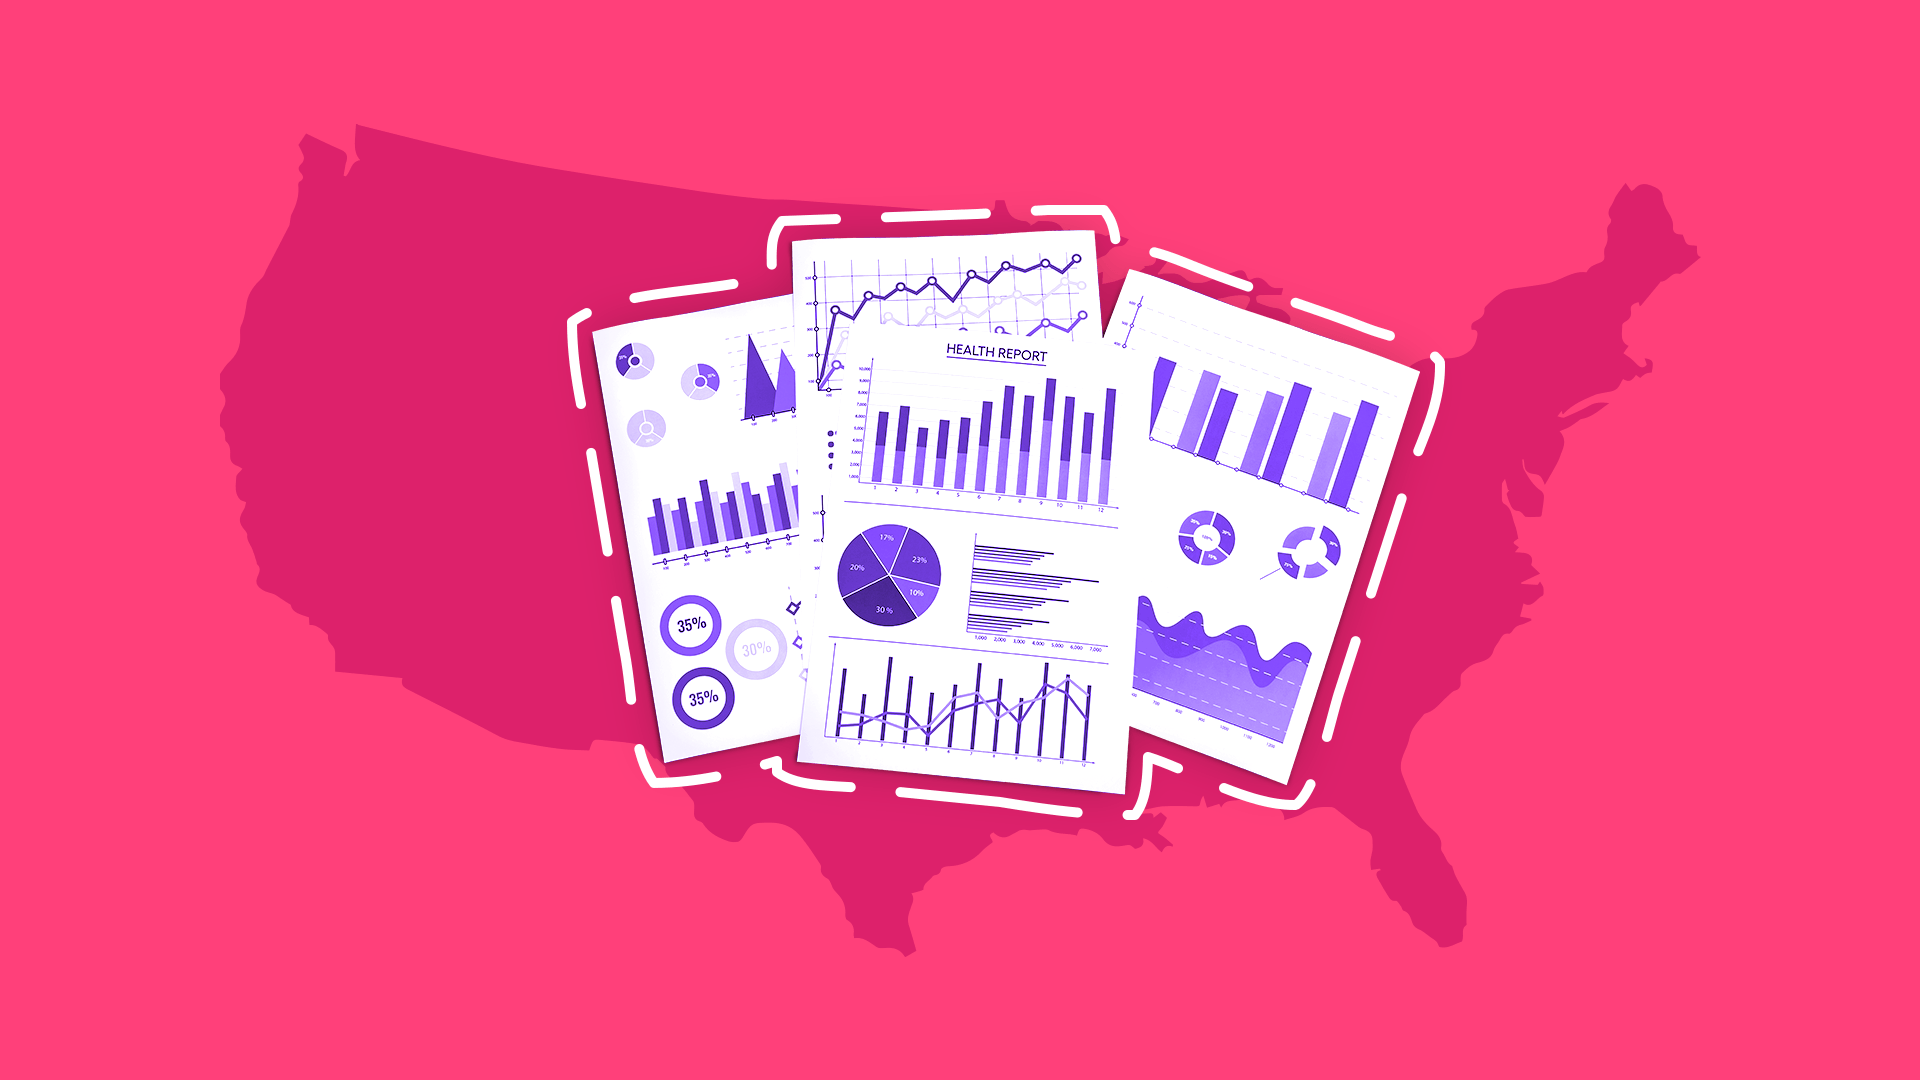 Illustration showing graphs and charts overlayed onto the continental united states